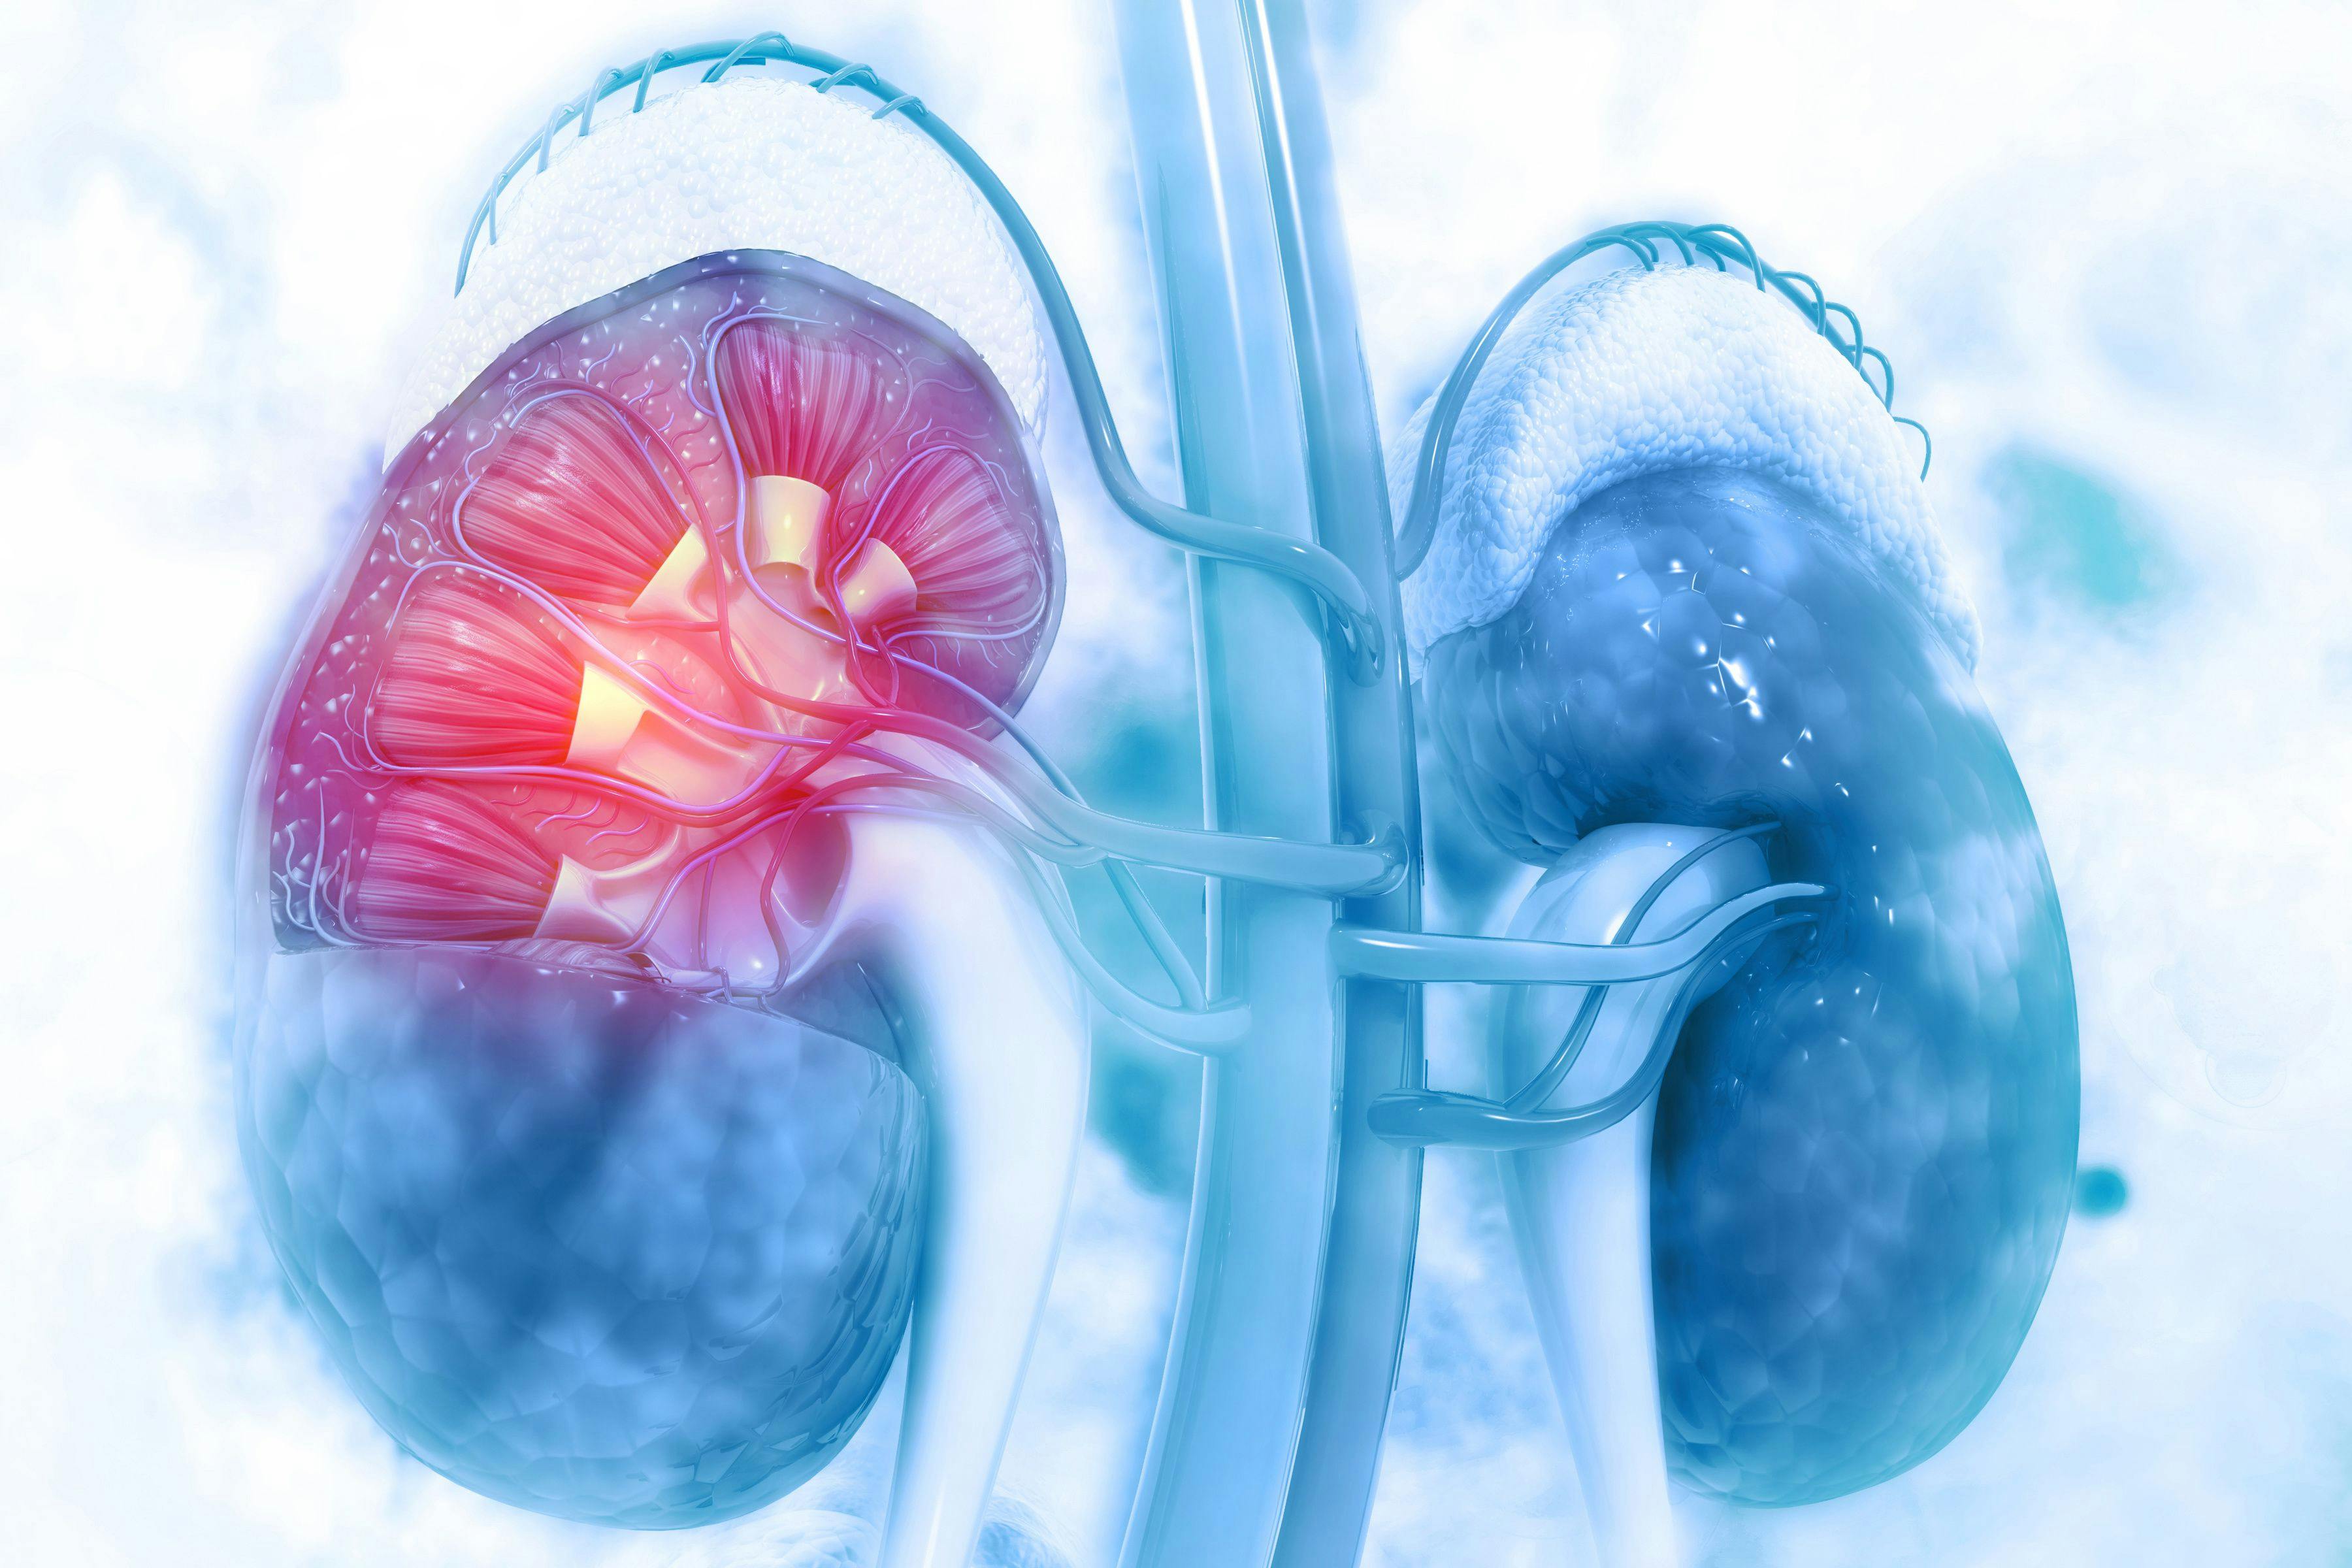 Reduced-Dose CT Scans Could Be Effective for Kidney Stone Imaging